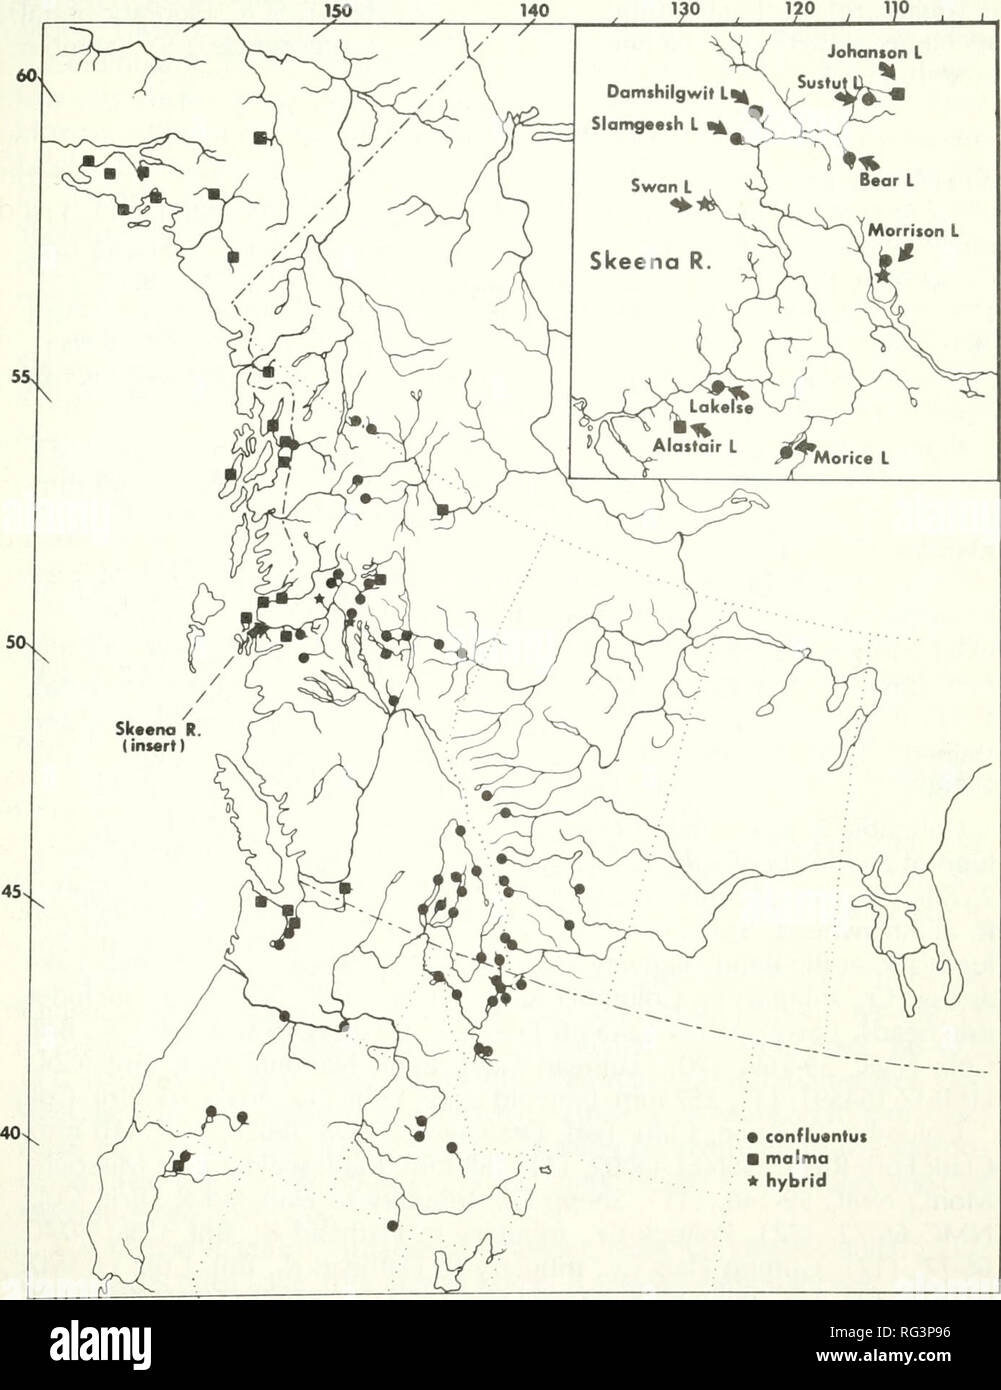 . California fish and game. Fisheries -- California; Game and game-birds -- California; Fishes -- California; Animal Population Groups; PÃªches; Gibier; Poissons. TAXONOMY AND DISTRIBUTION OF THE BULL TROUT 141. â¢ conflunntui â malma * hybrid FIGURE 1. Distribution of Salvelinus confluentus and Salvelinus malma over same latitudinal range in North America; plotted from localities of specimens examined. angular); ATL (atlas vertebra); BOC (basioccipital); BR (branchiostegal ray); BS (basiphenoid); DE (dentary); ECPT (ectopterygoid); ENPT (endop- terygoid); EOC (exoccipital); EPO (epiotic); FR  Stock Photo